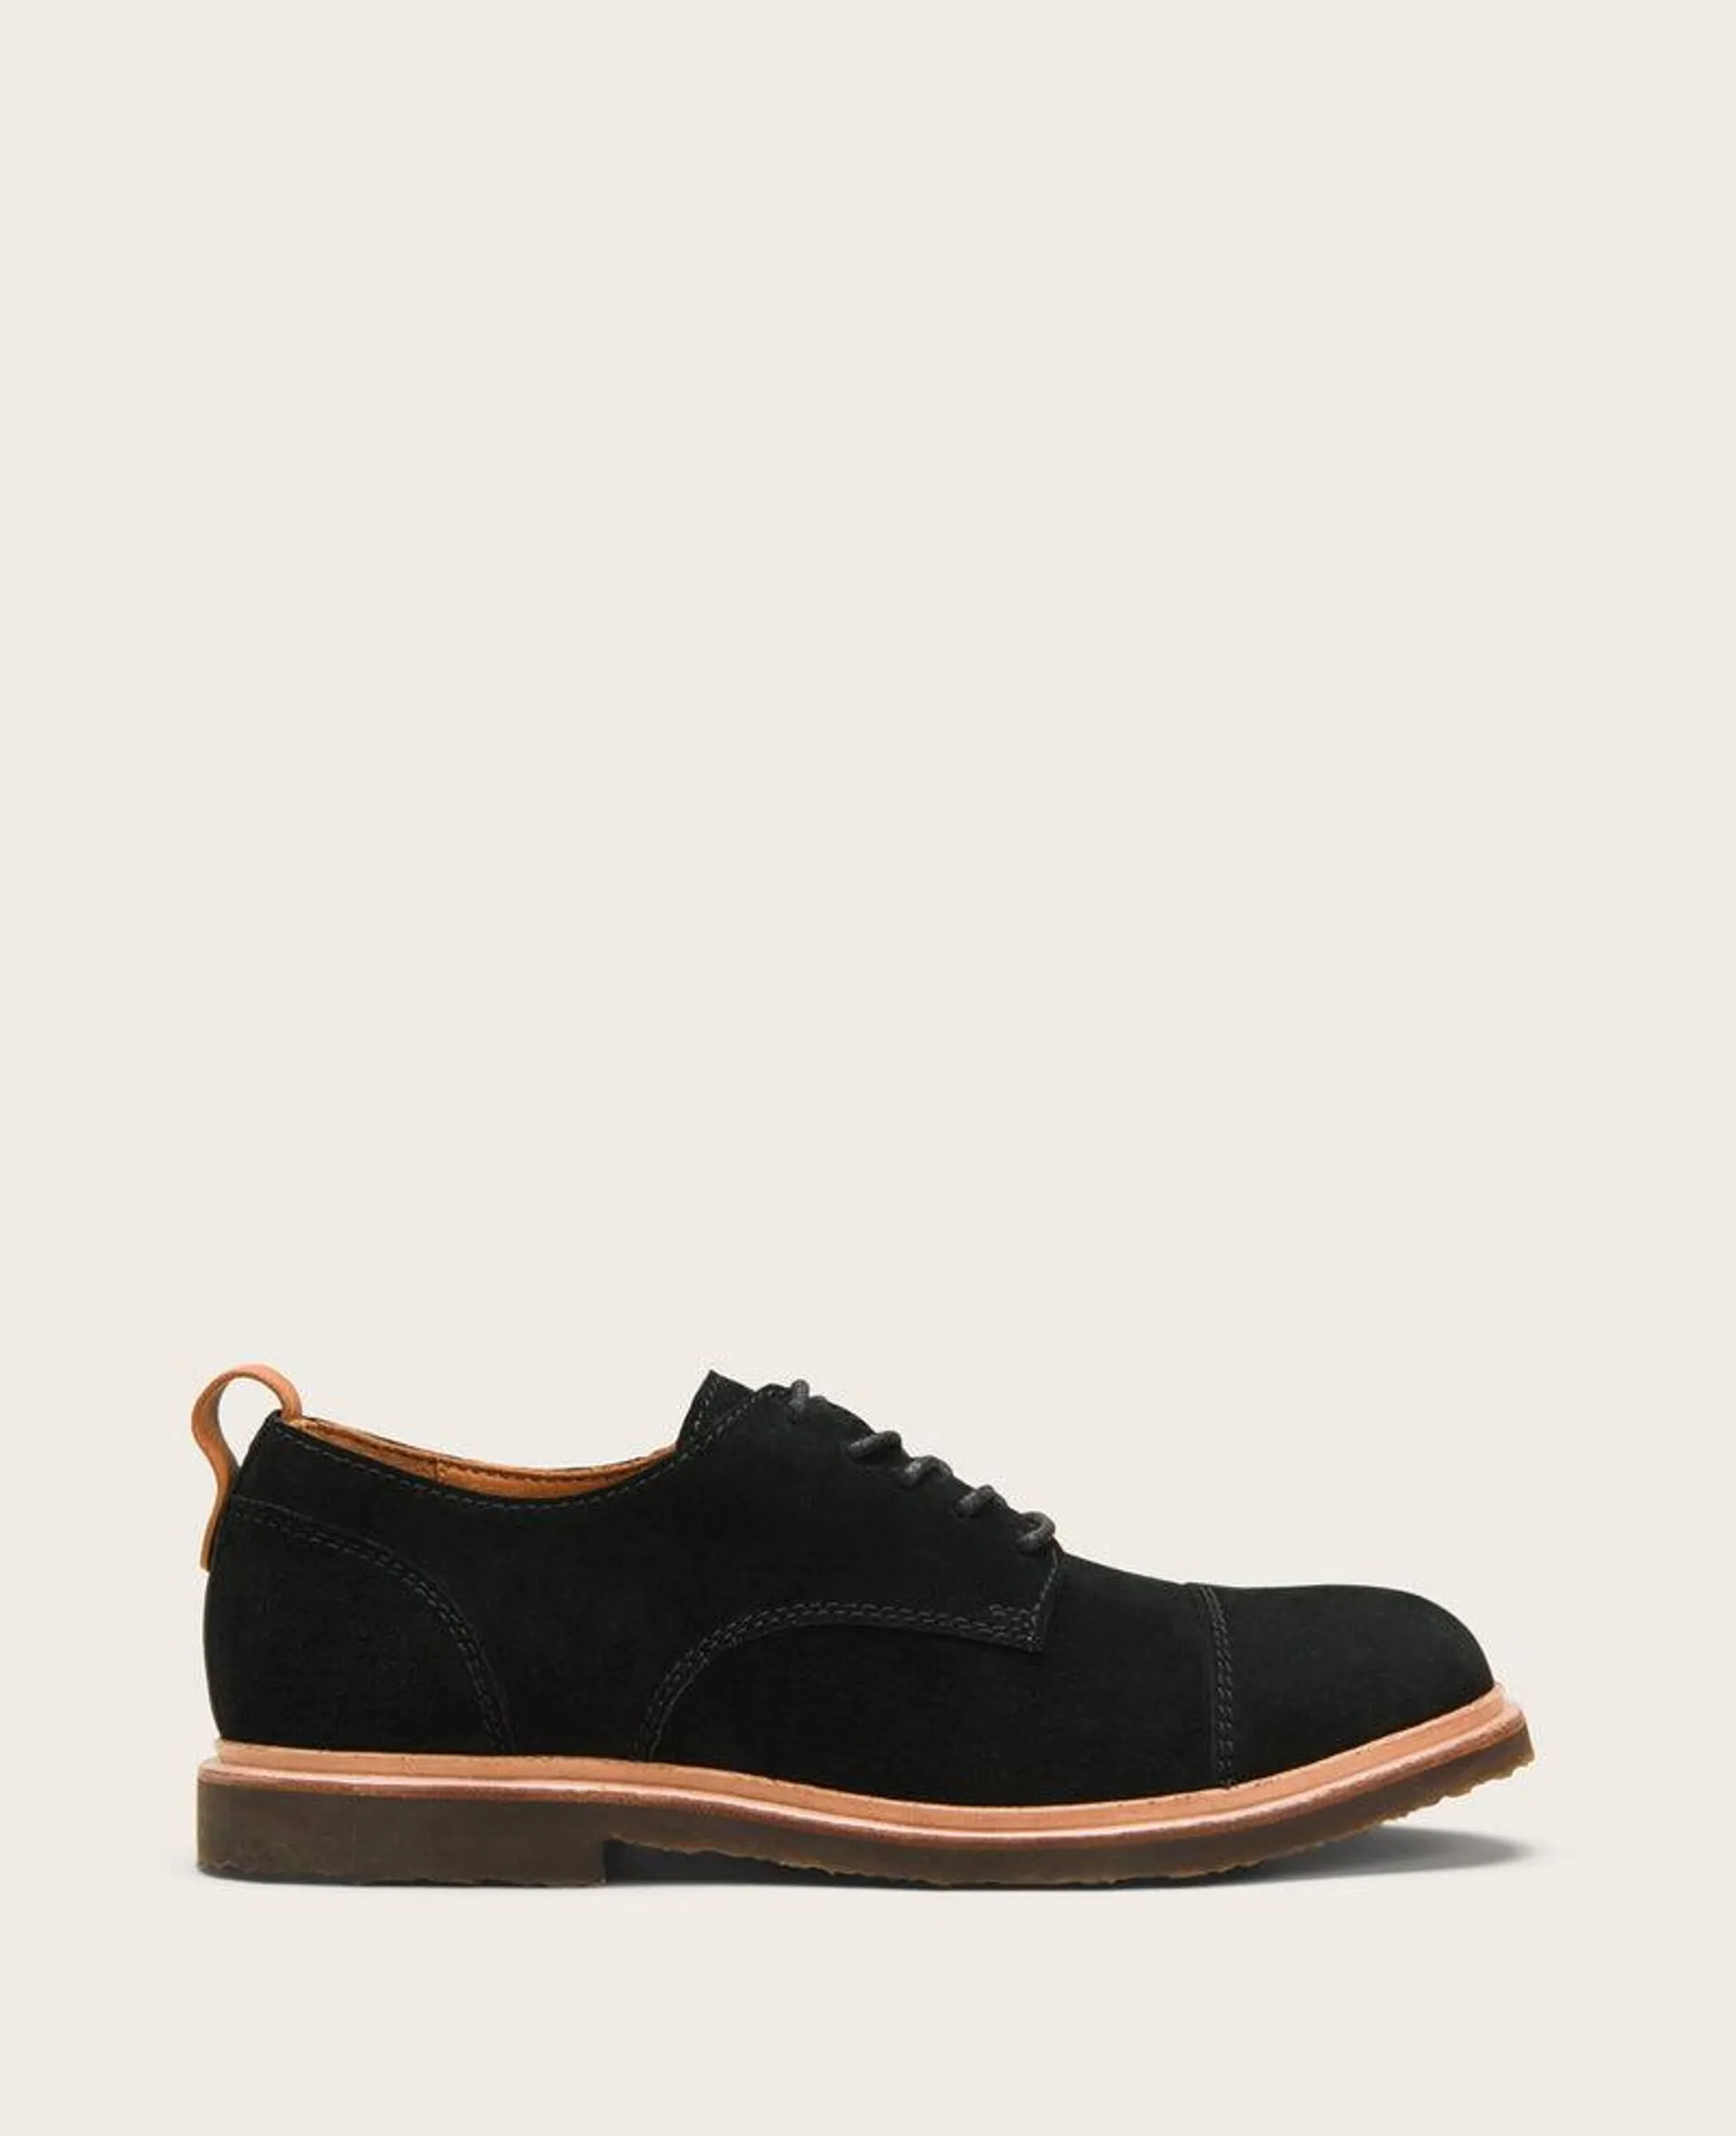 Donovan Suede Lace-Up Oxford